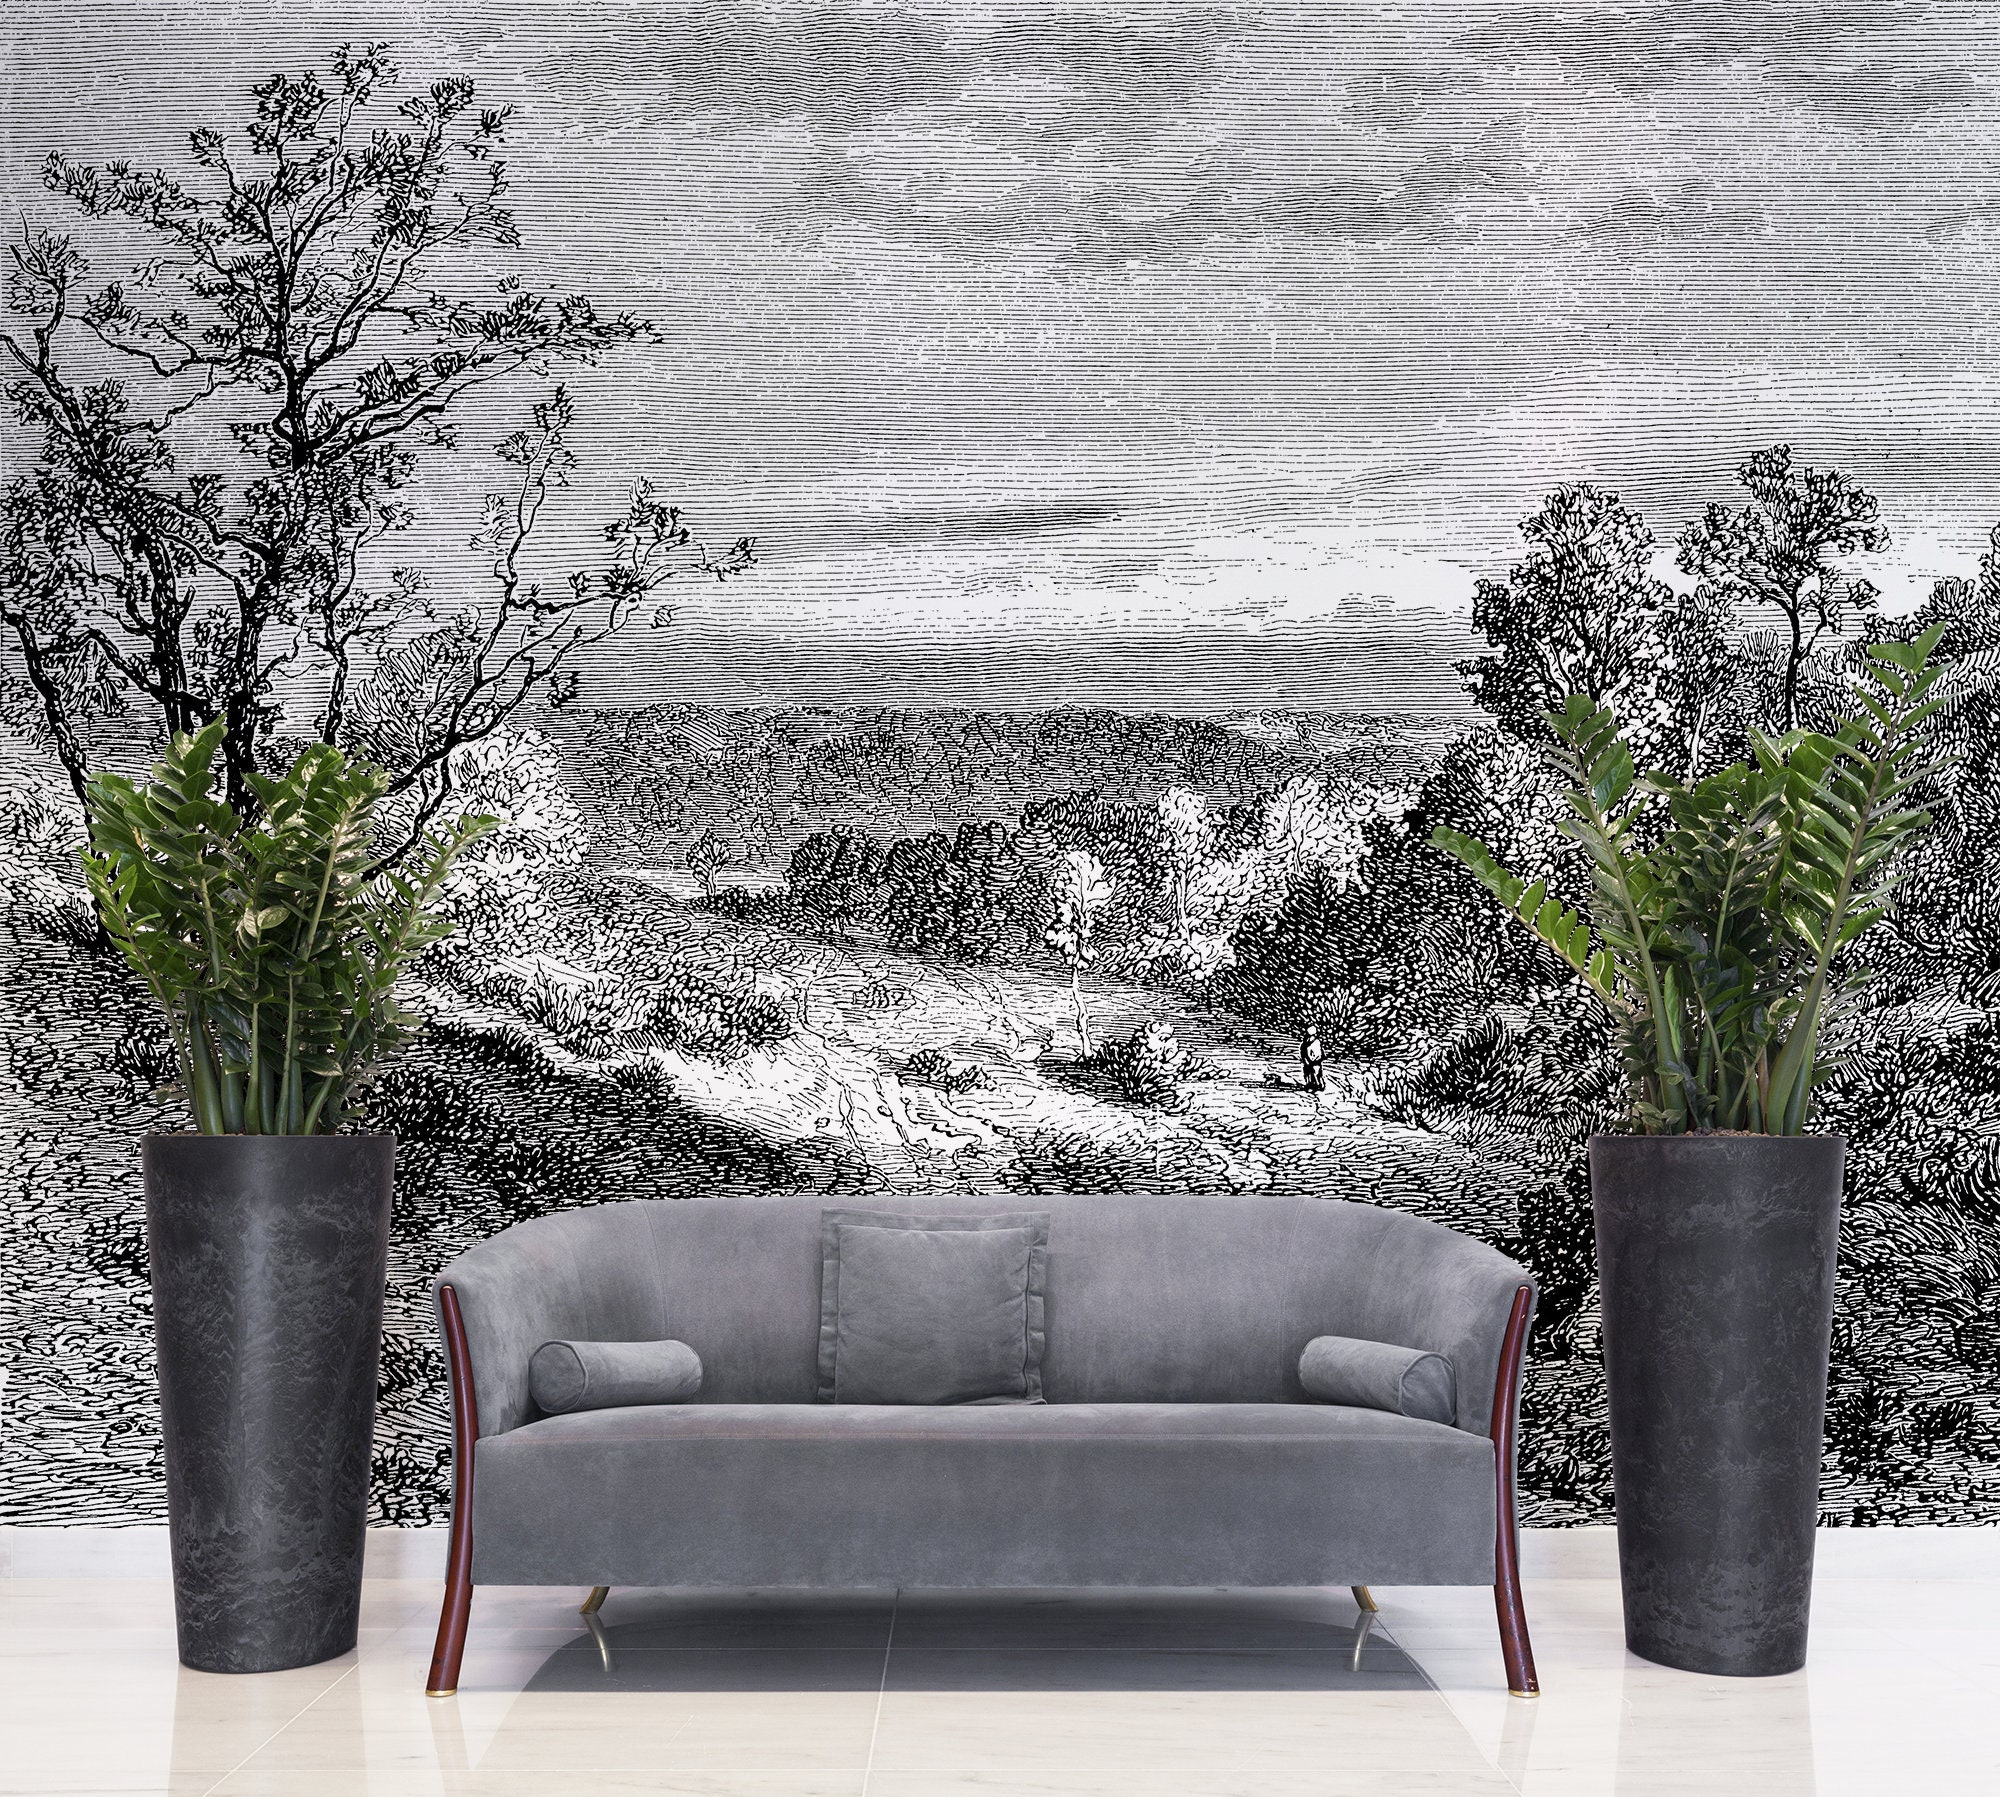 Vivyet Peel and Stick Wall Mural - Retro Continents (Black) 38.6x27.6